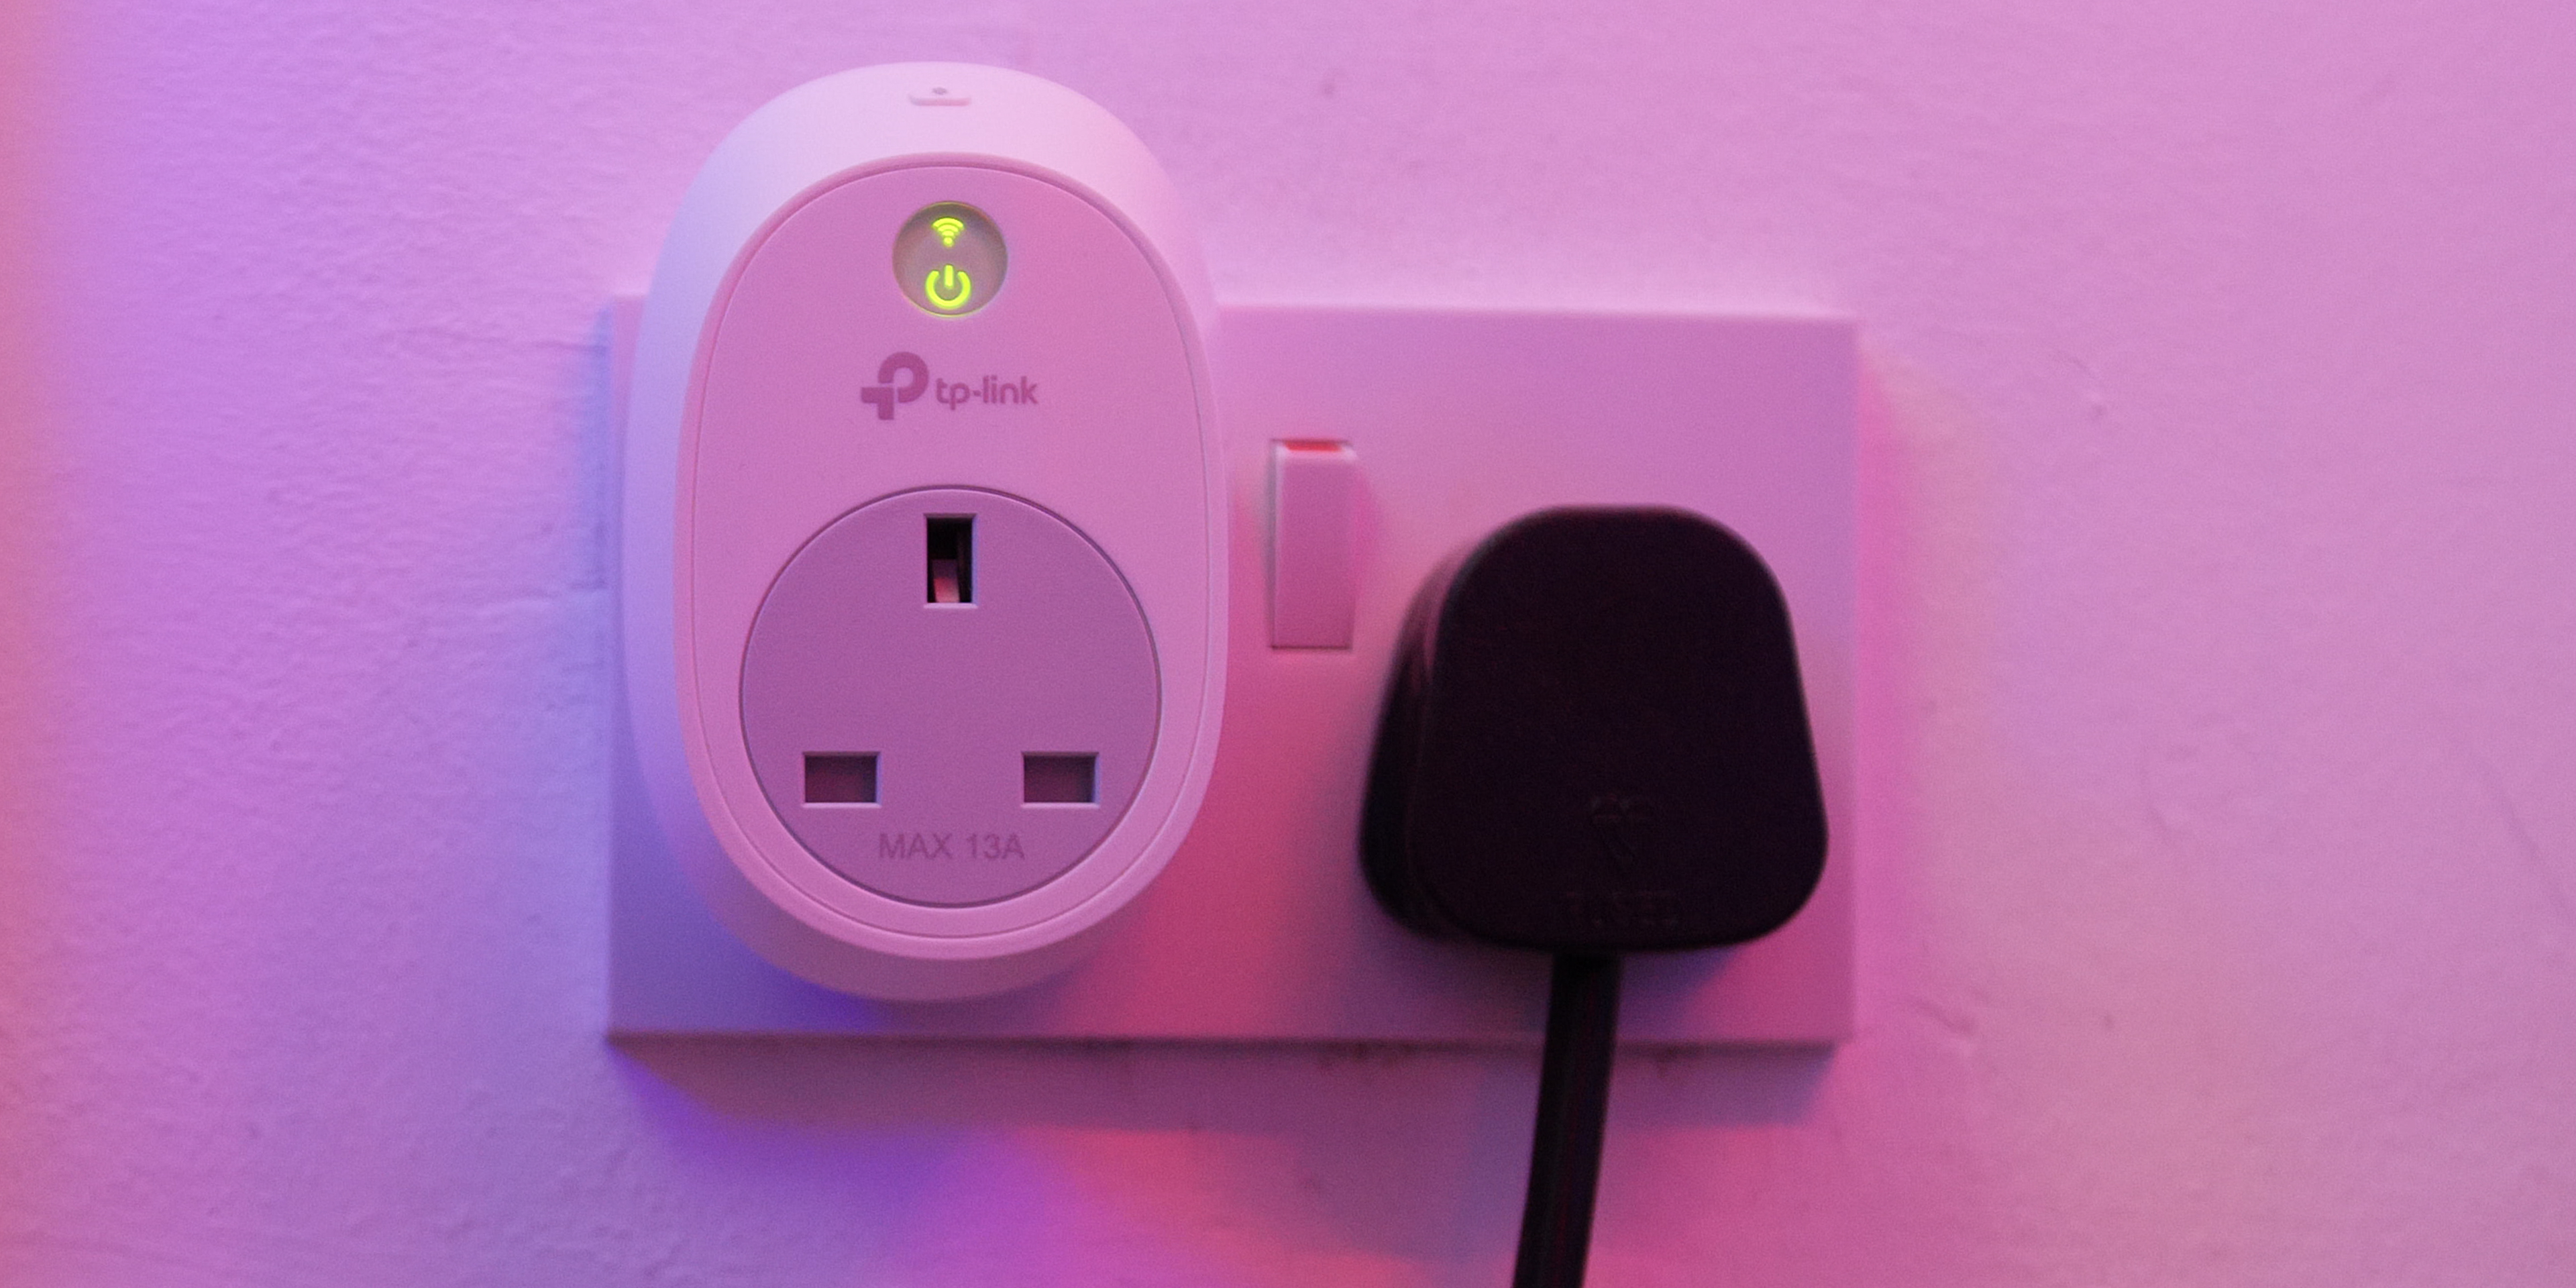 cheap smart plugs that work with google home